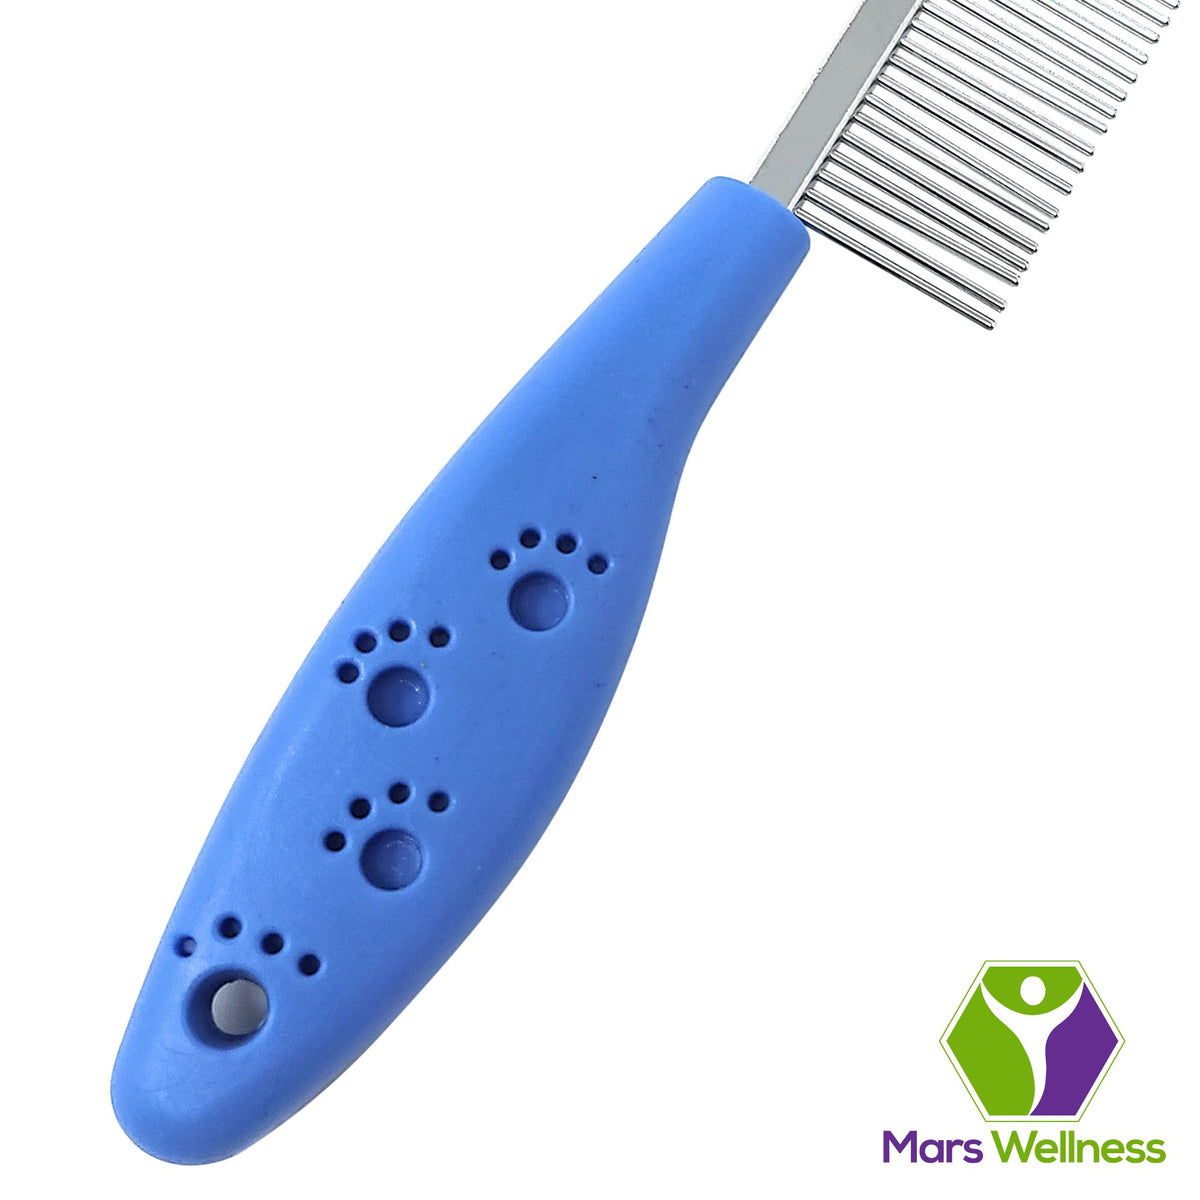 MARS WELLNESS Pet Comb 2 Pack Kit - Single Sided Stainless Steel Teeth and Double Sided Dog and Cat Comb - Mars Med Supply